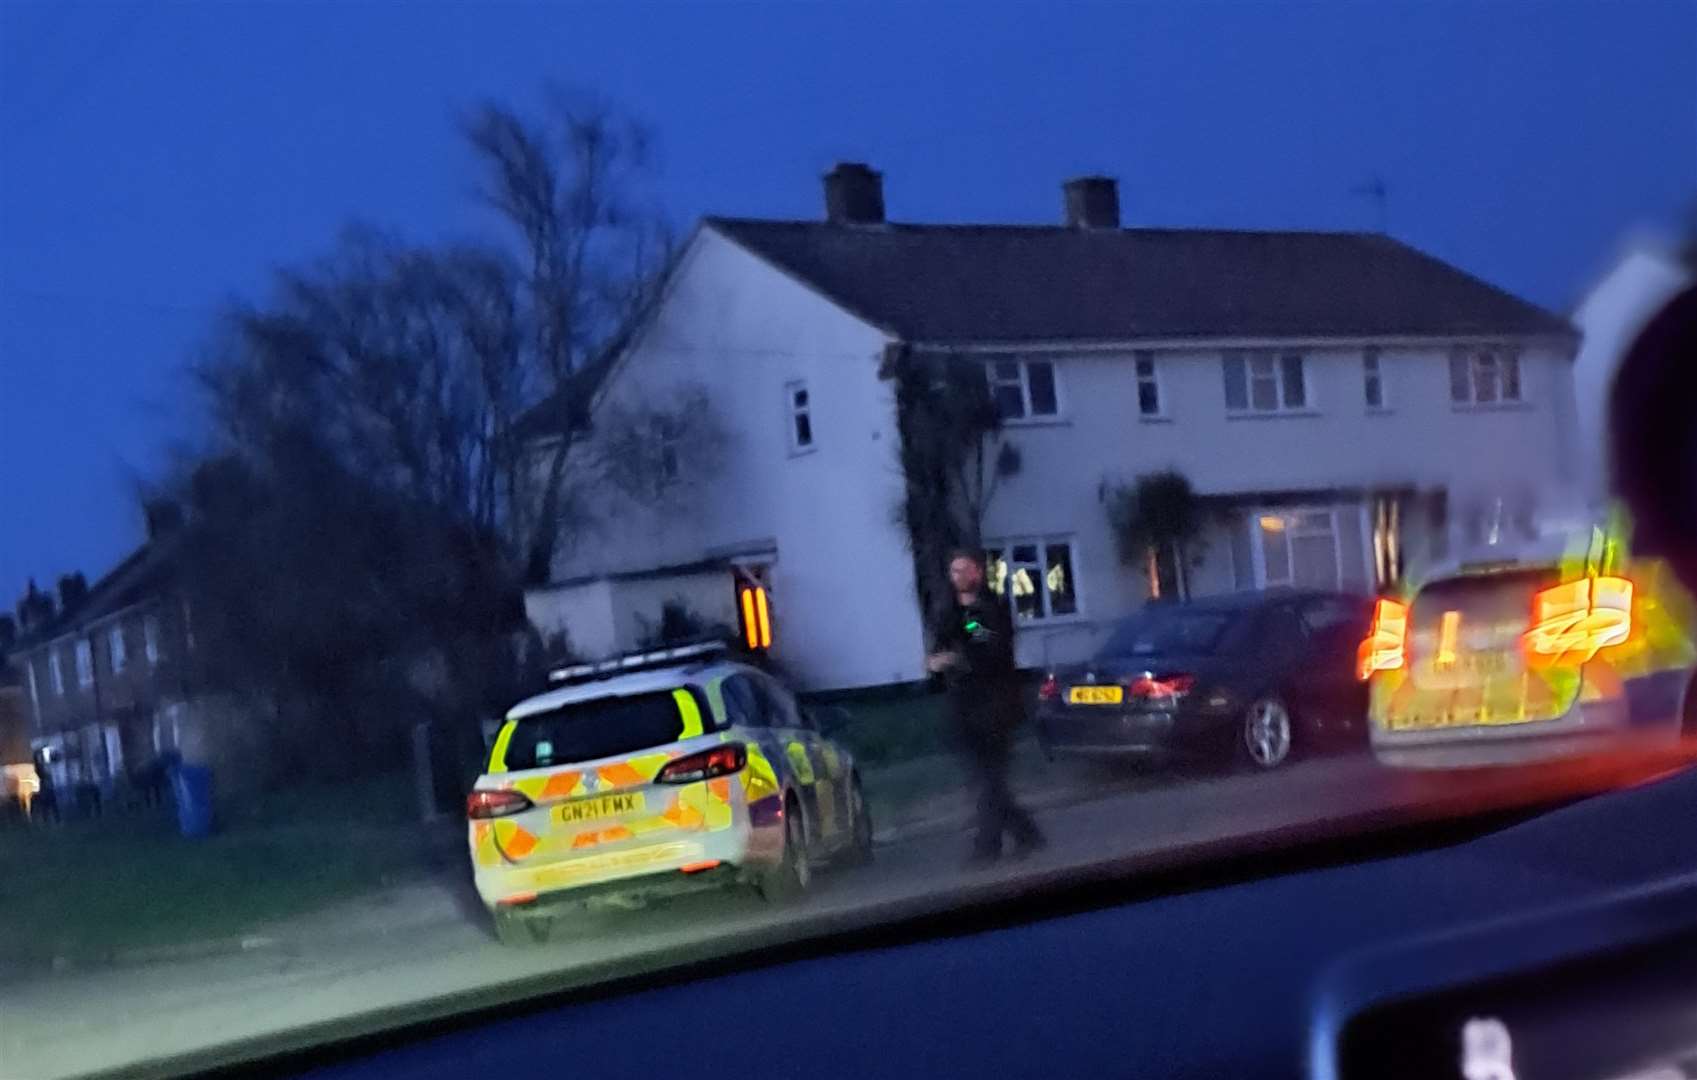 A passerby said It looked like armed officers were going 'in and out of a house'